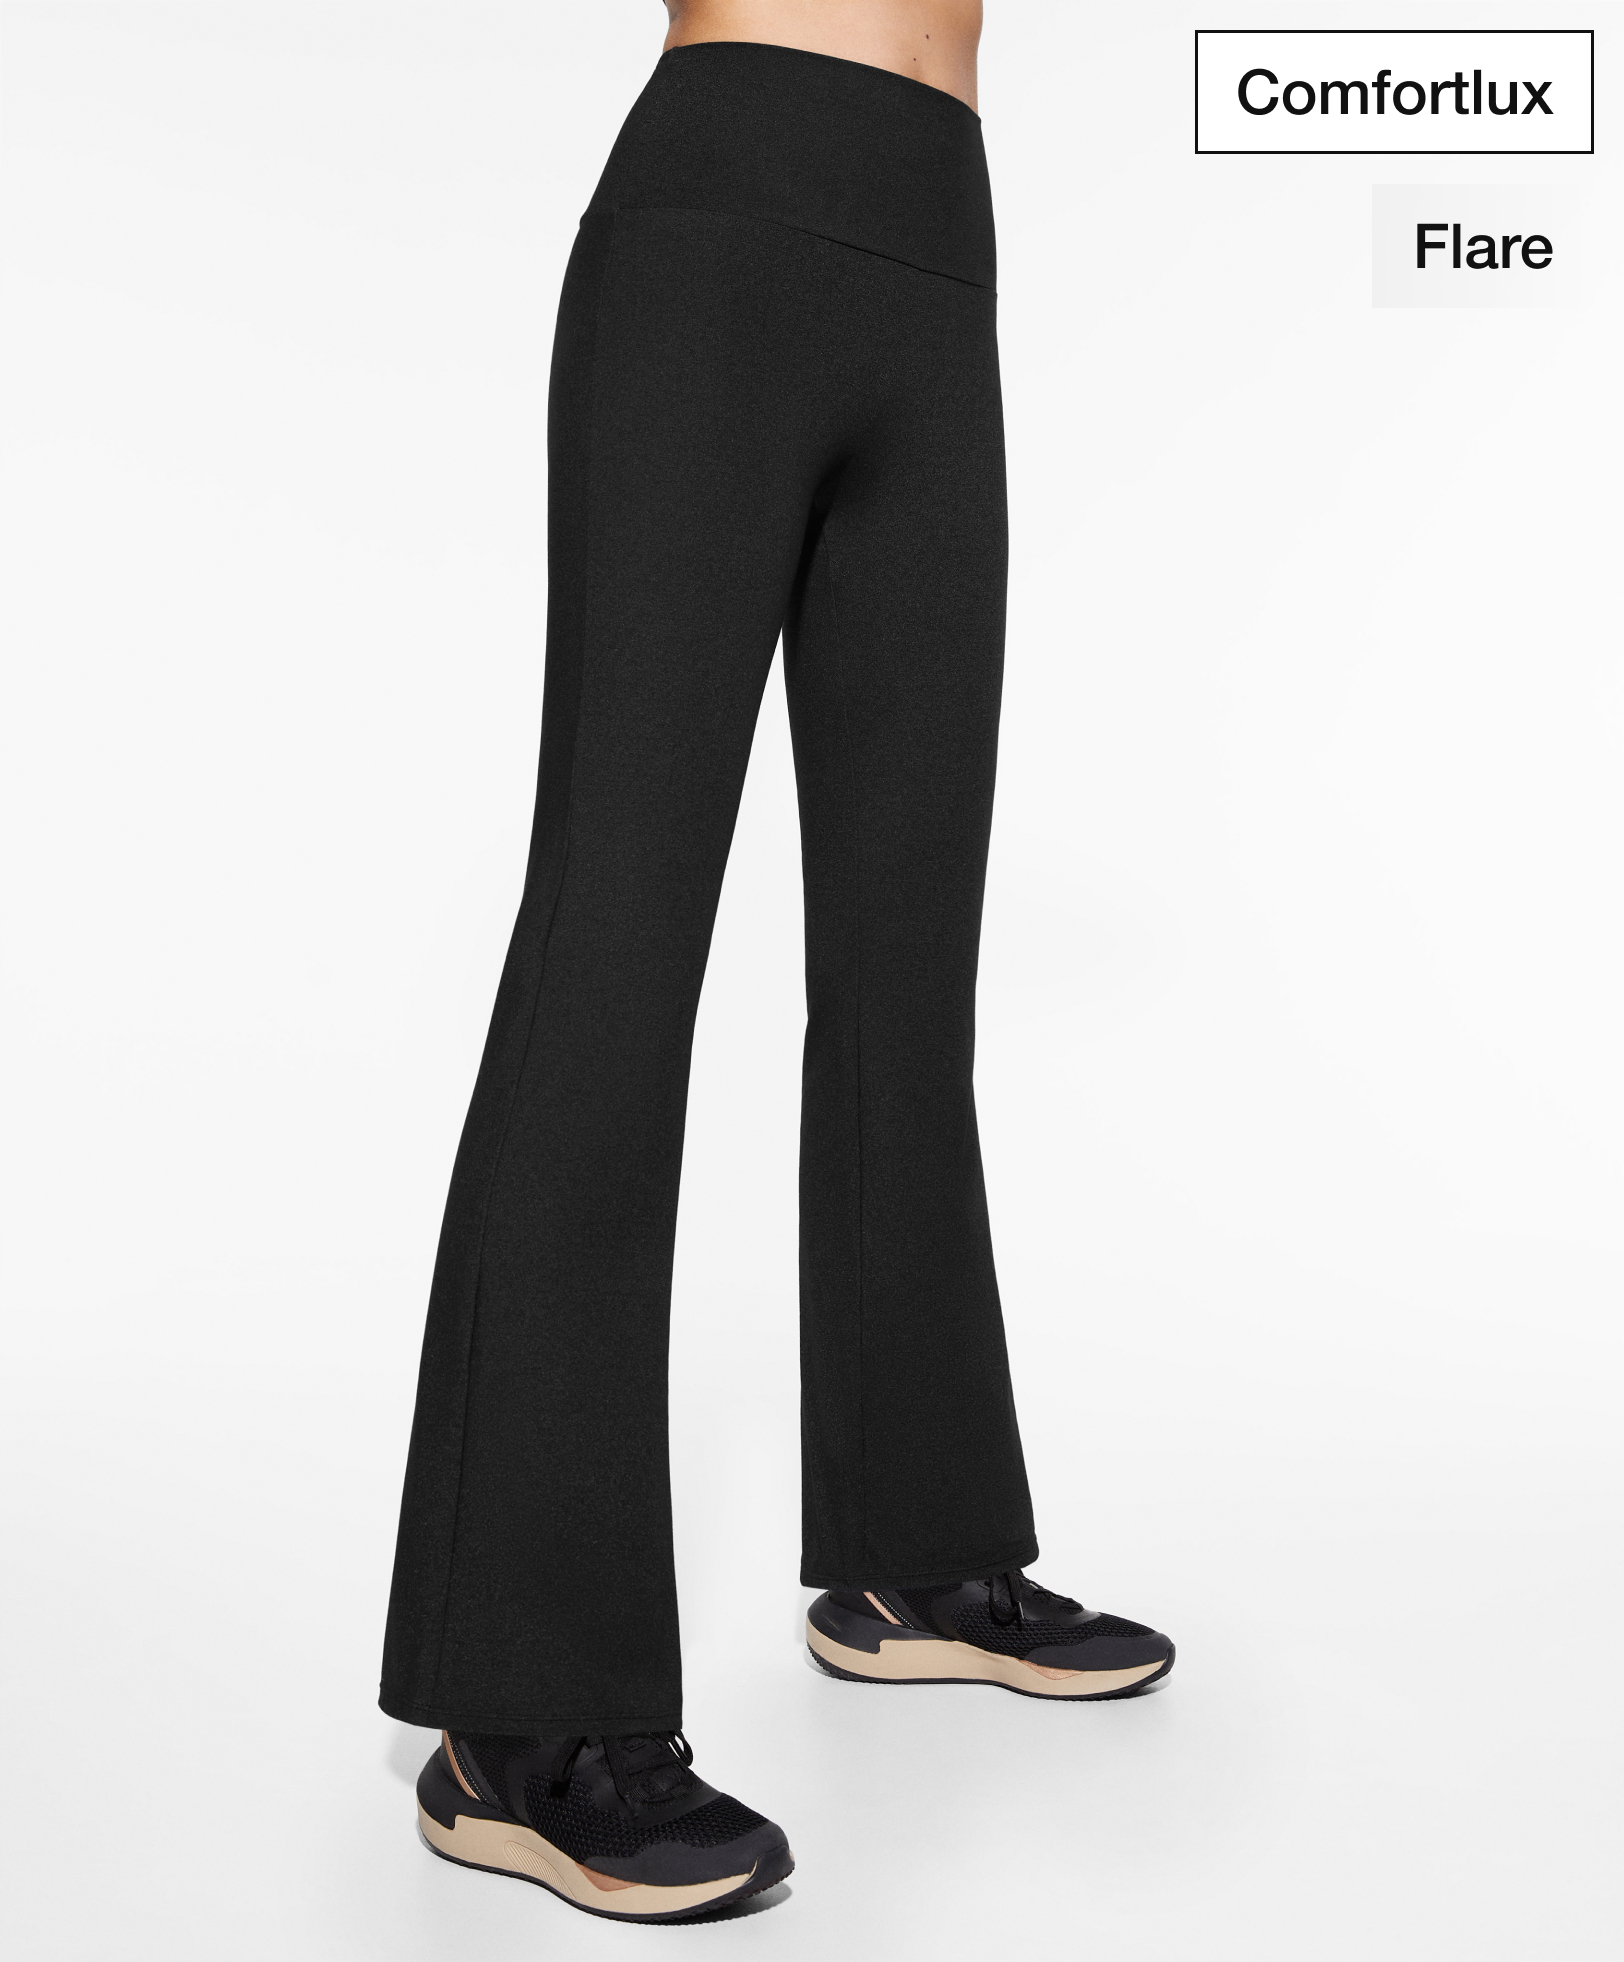 High-rise Comfortlux flare trousers